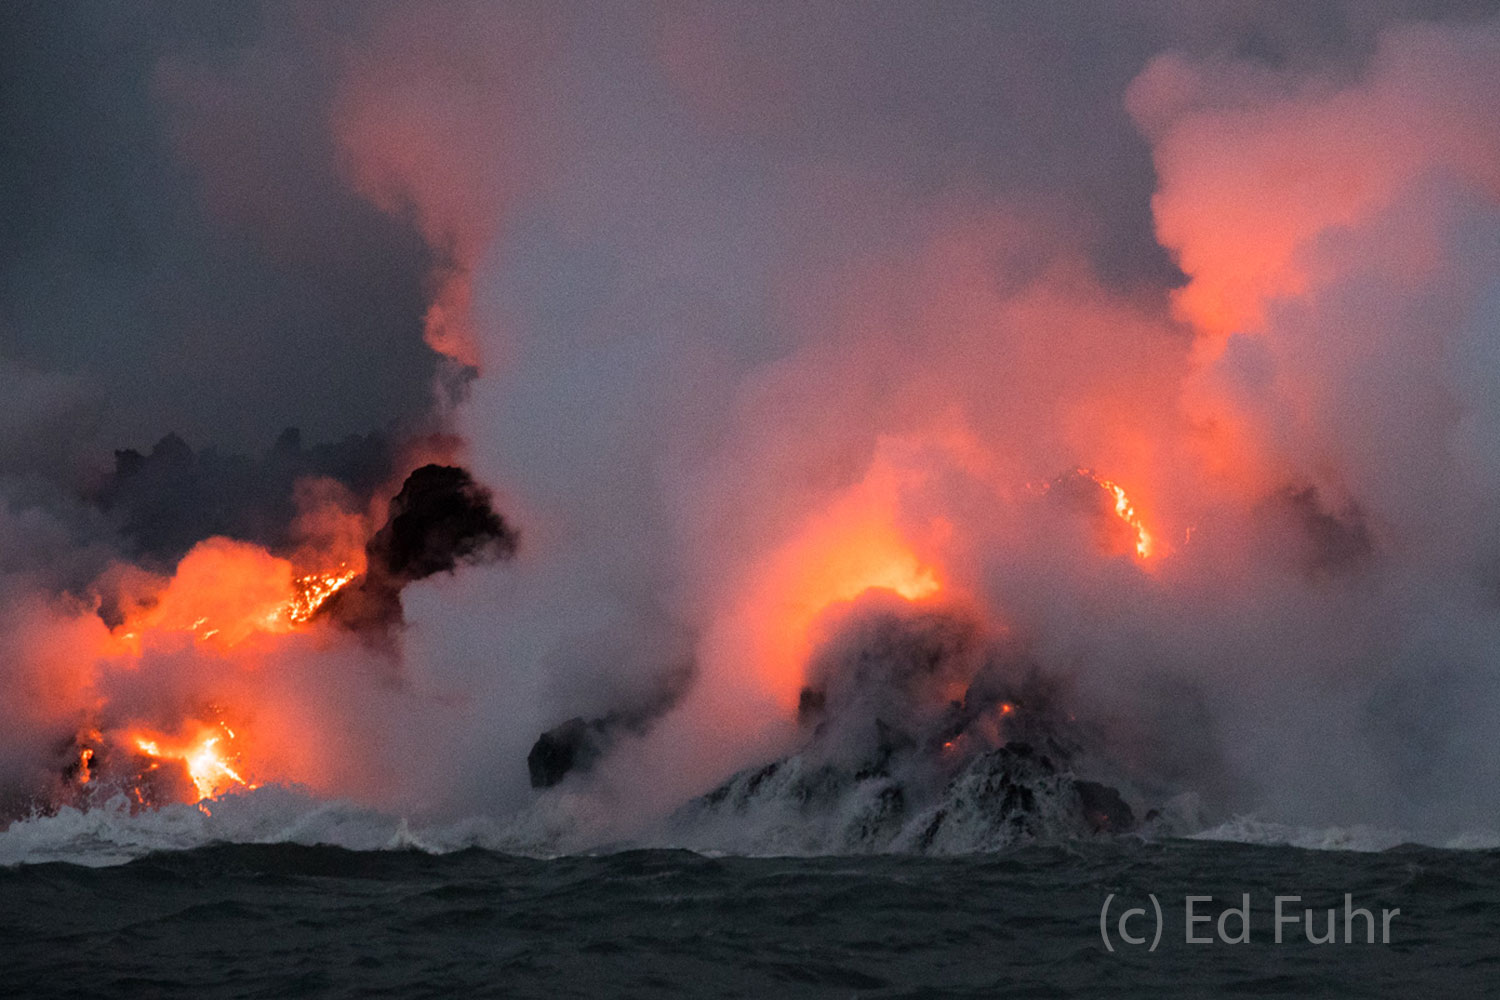 The heat from the 7000 degree lava can be felt hundreds of yards away and it boils the waters of the sea.